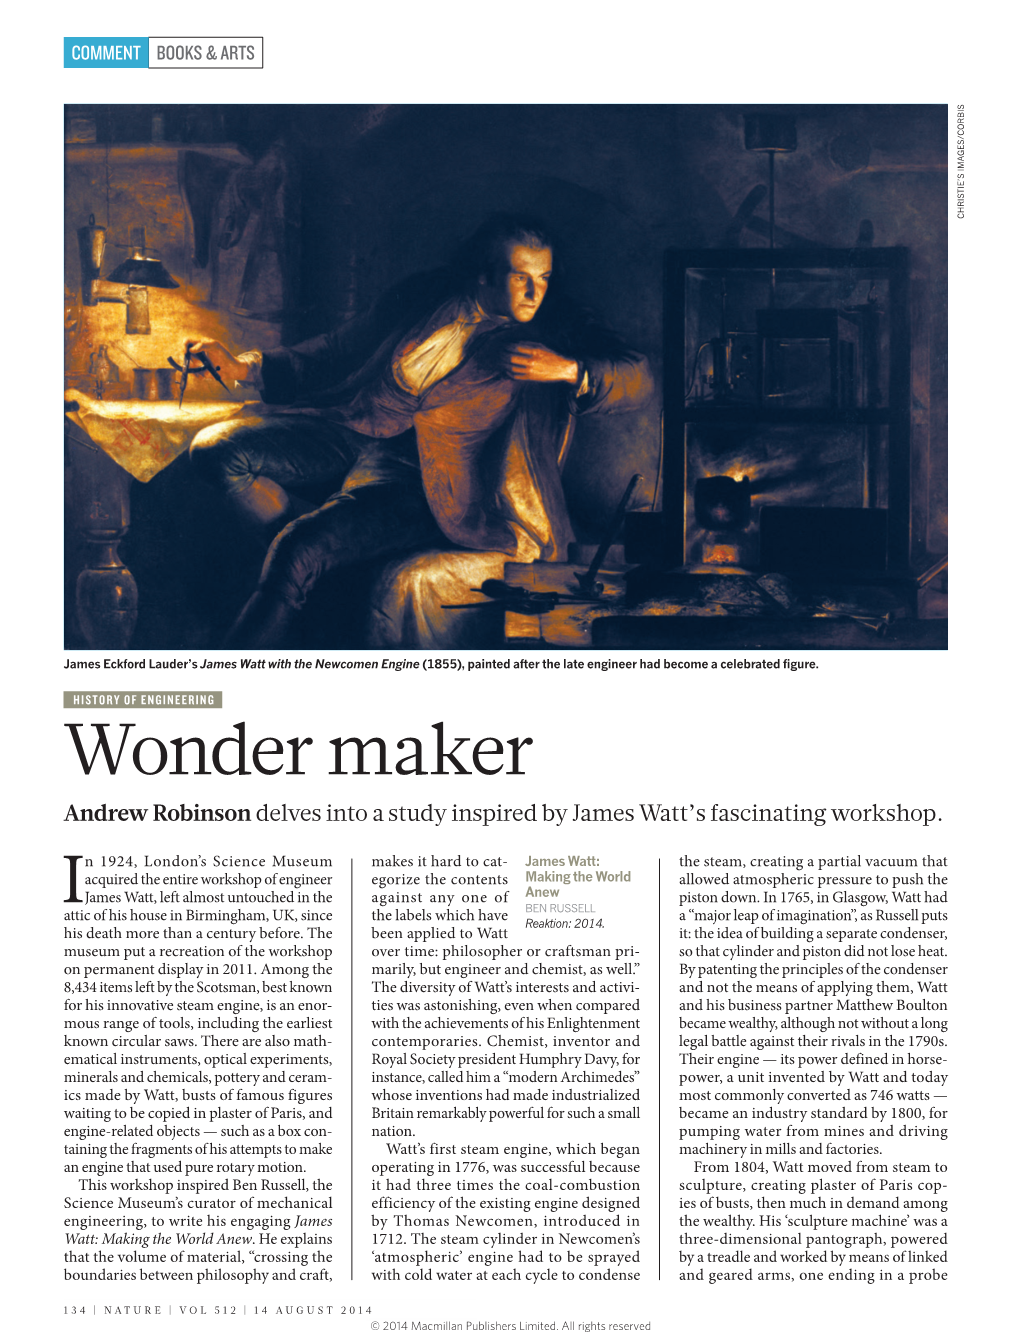 Wonder Maker Andrew Robinson Delves Into a Study Inspired by James Watt’S Fascinating Workshop